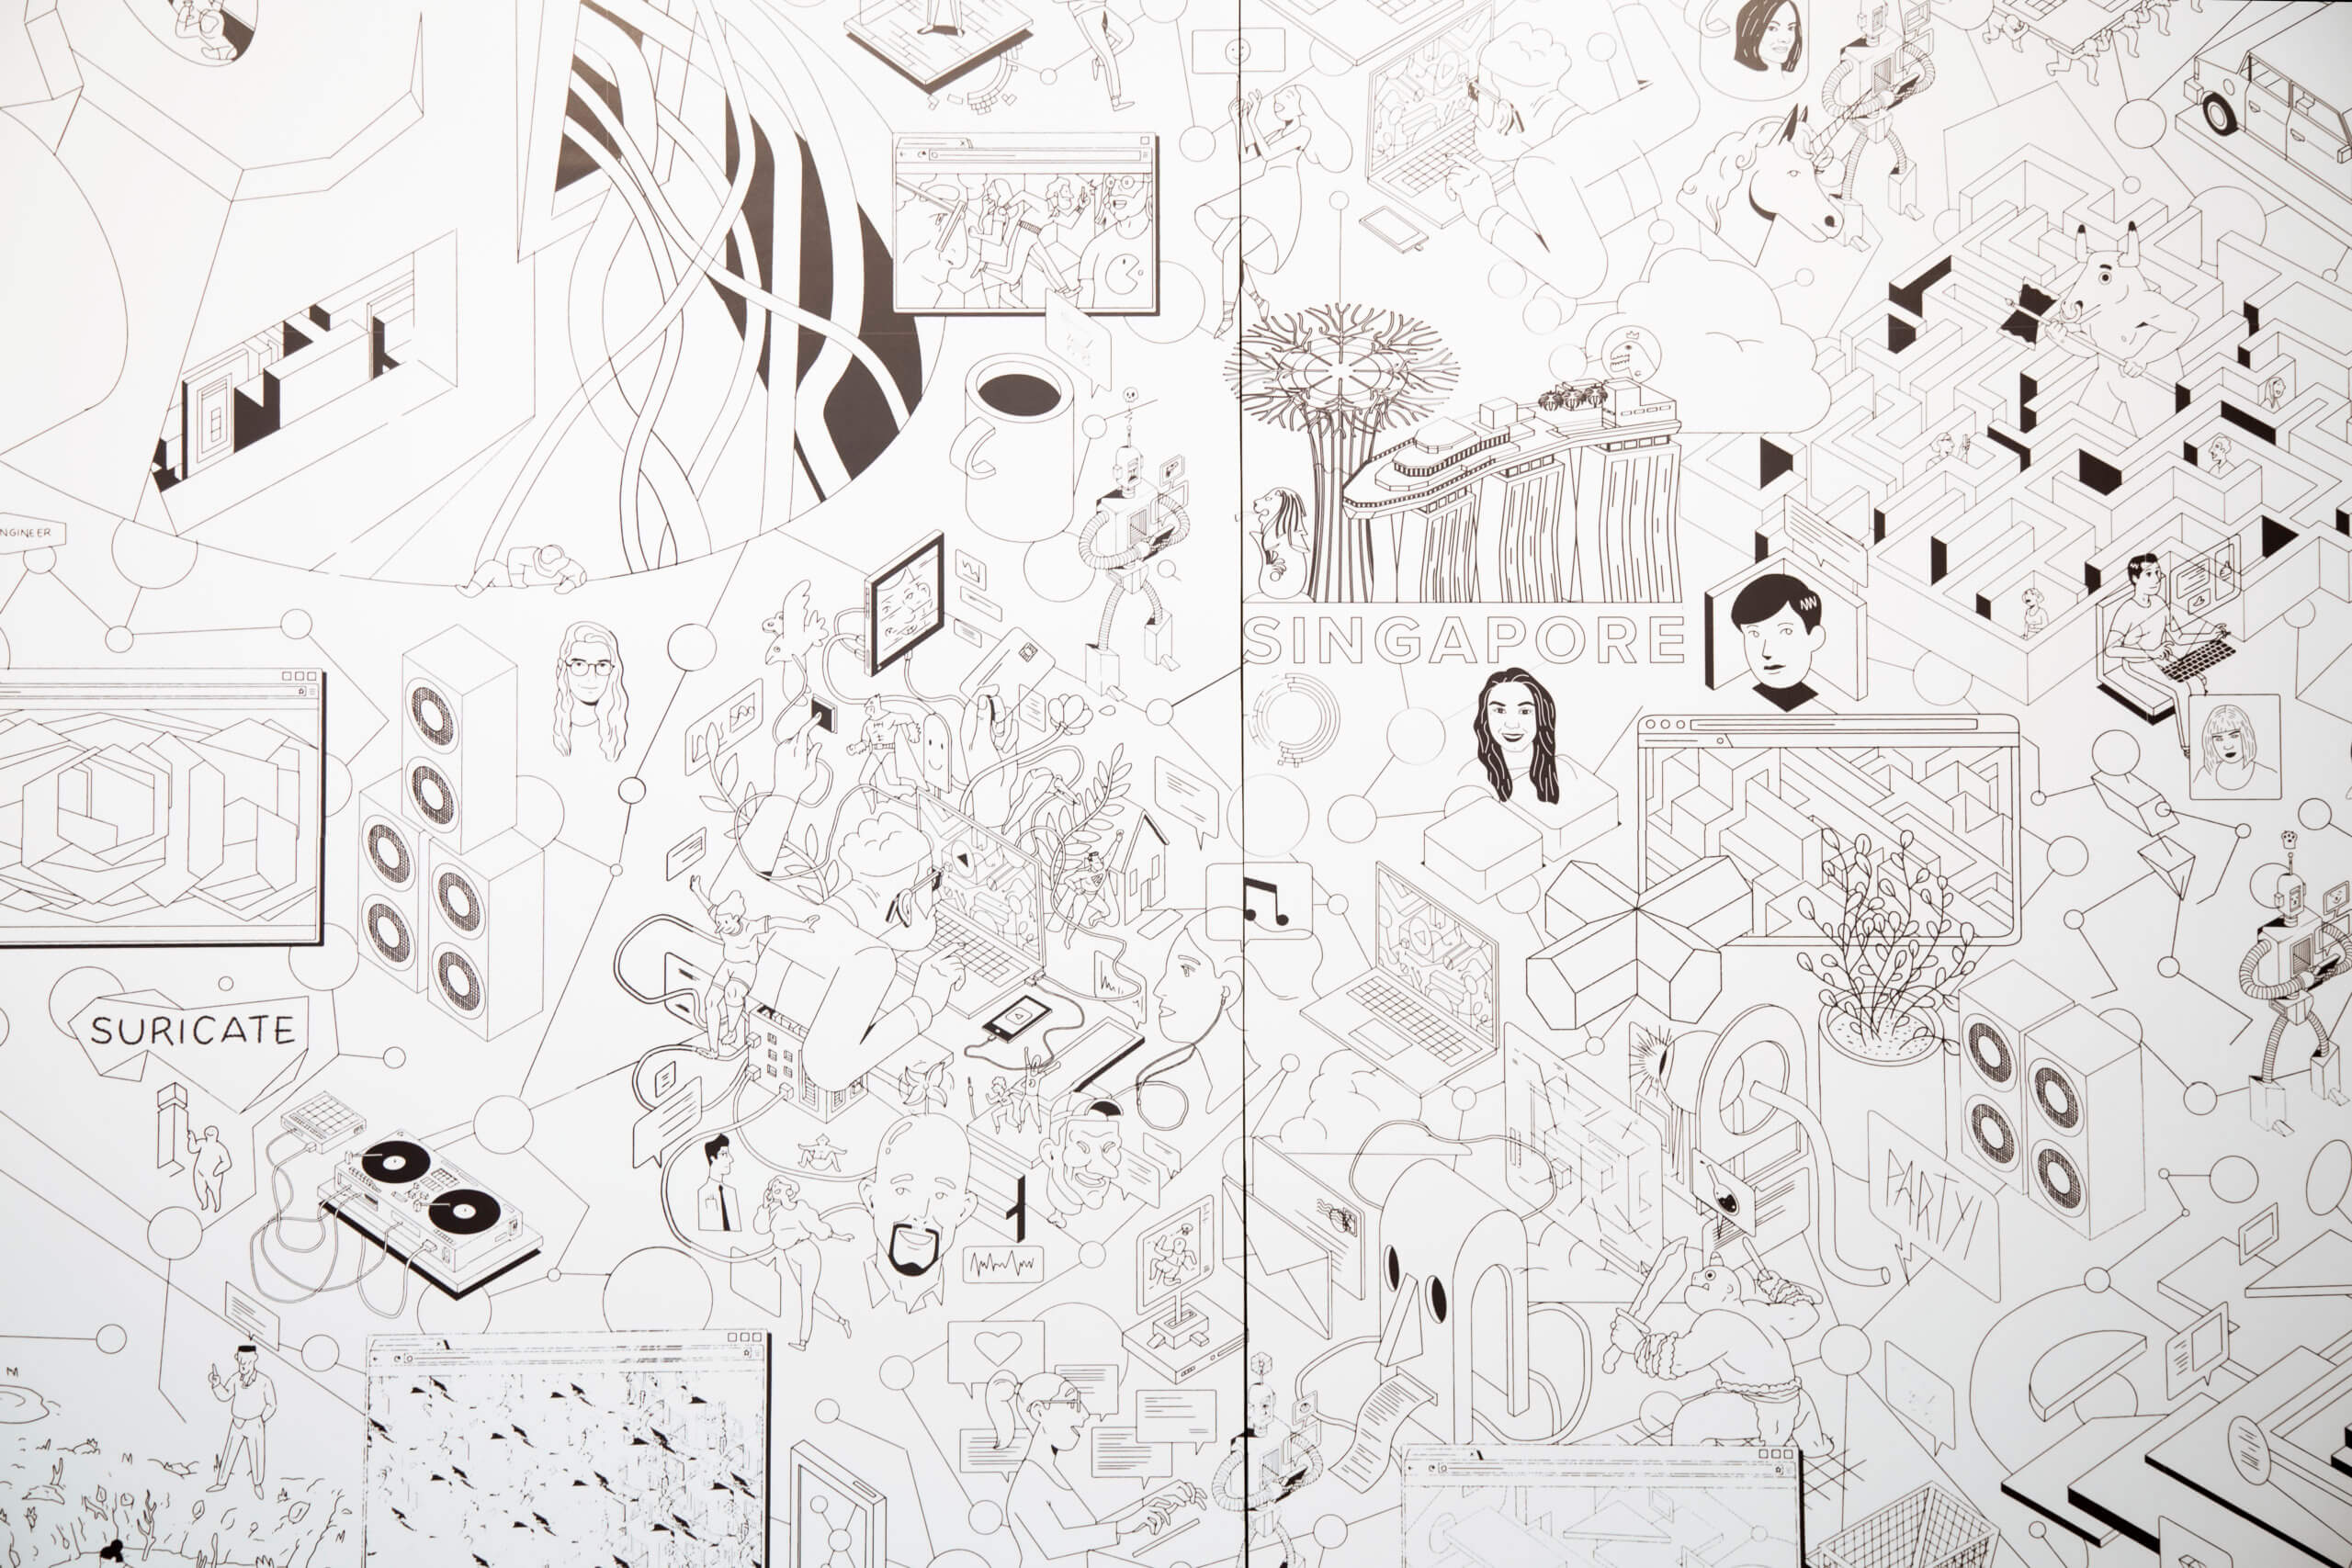 A wall mural at contentsquares new york city office